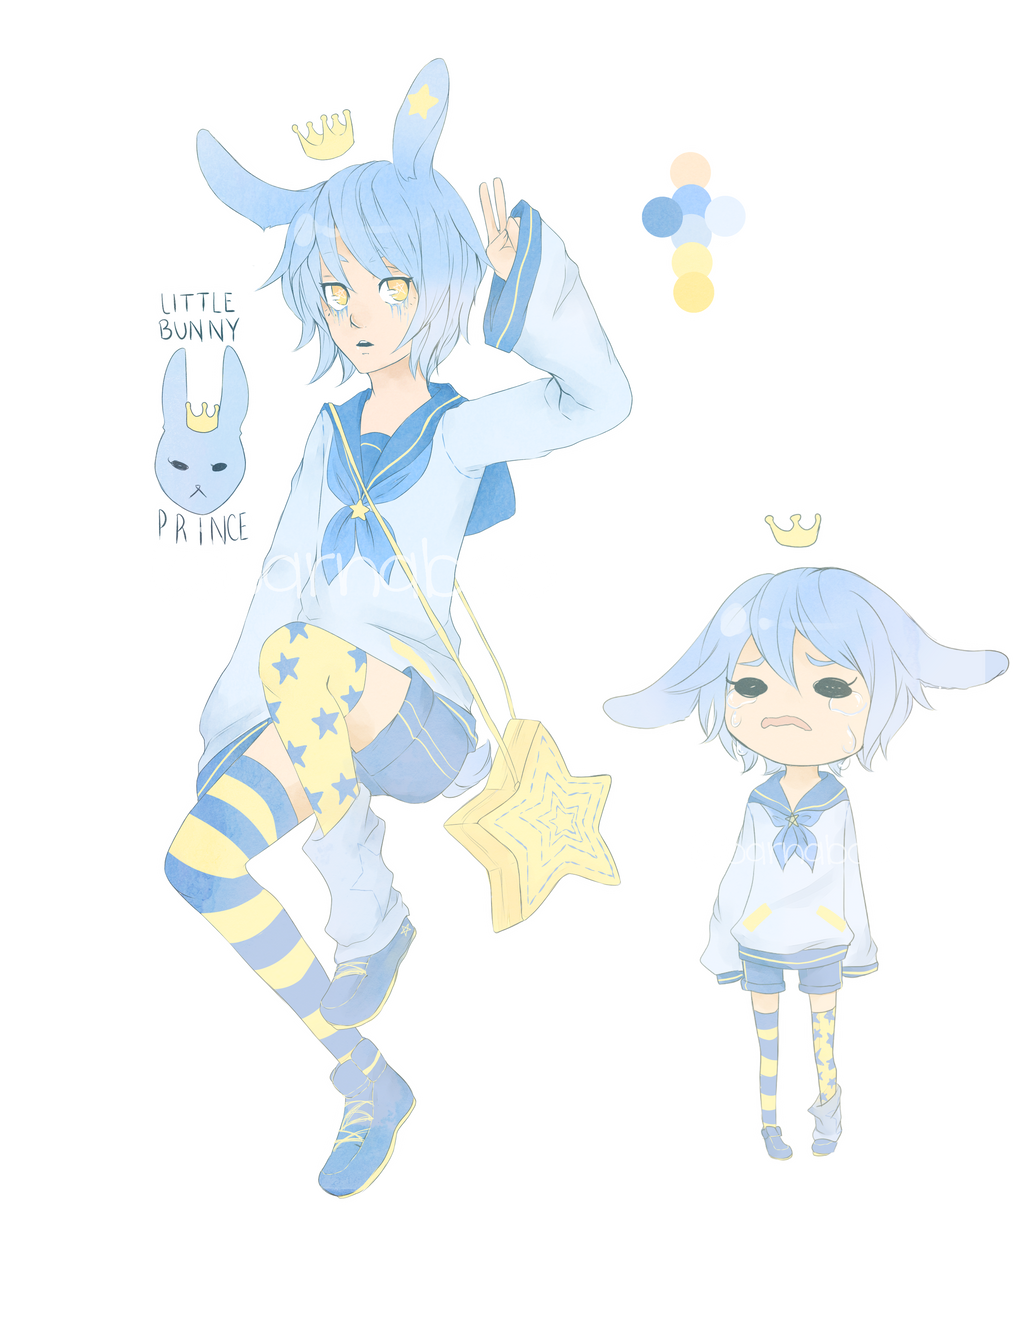 Little Bunny Prince Auction (CLOSED)